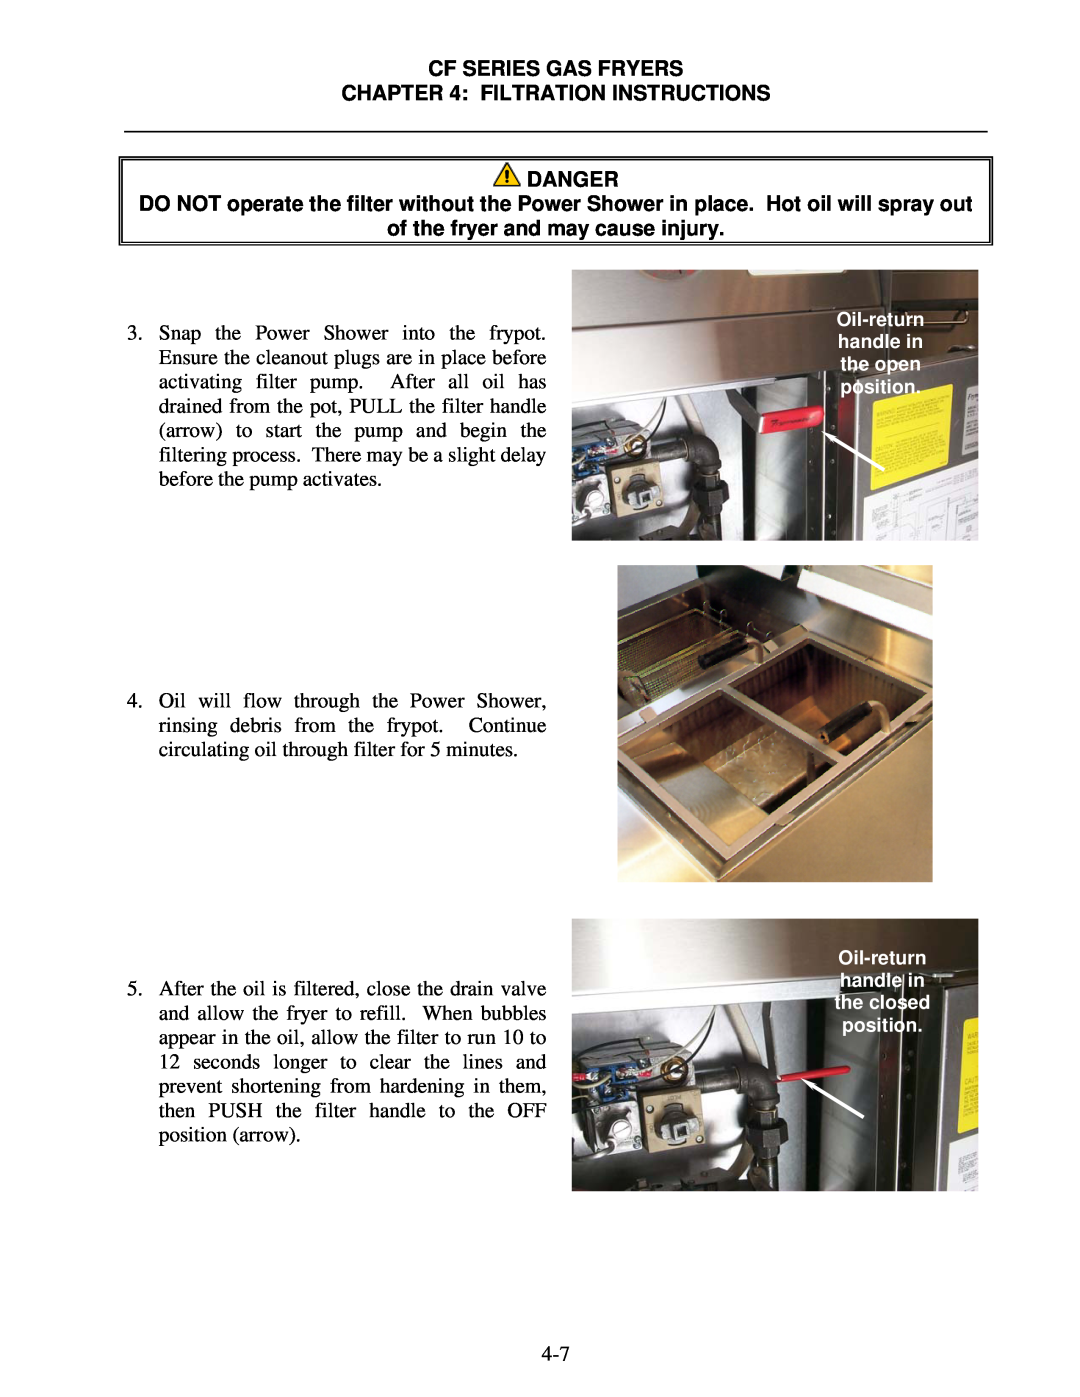 Frymaster CF Series operation manual Cf Series Gas Fryers Filtration Instructions Danger, of the fryer and may cause injury 